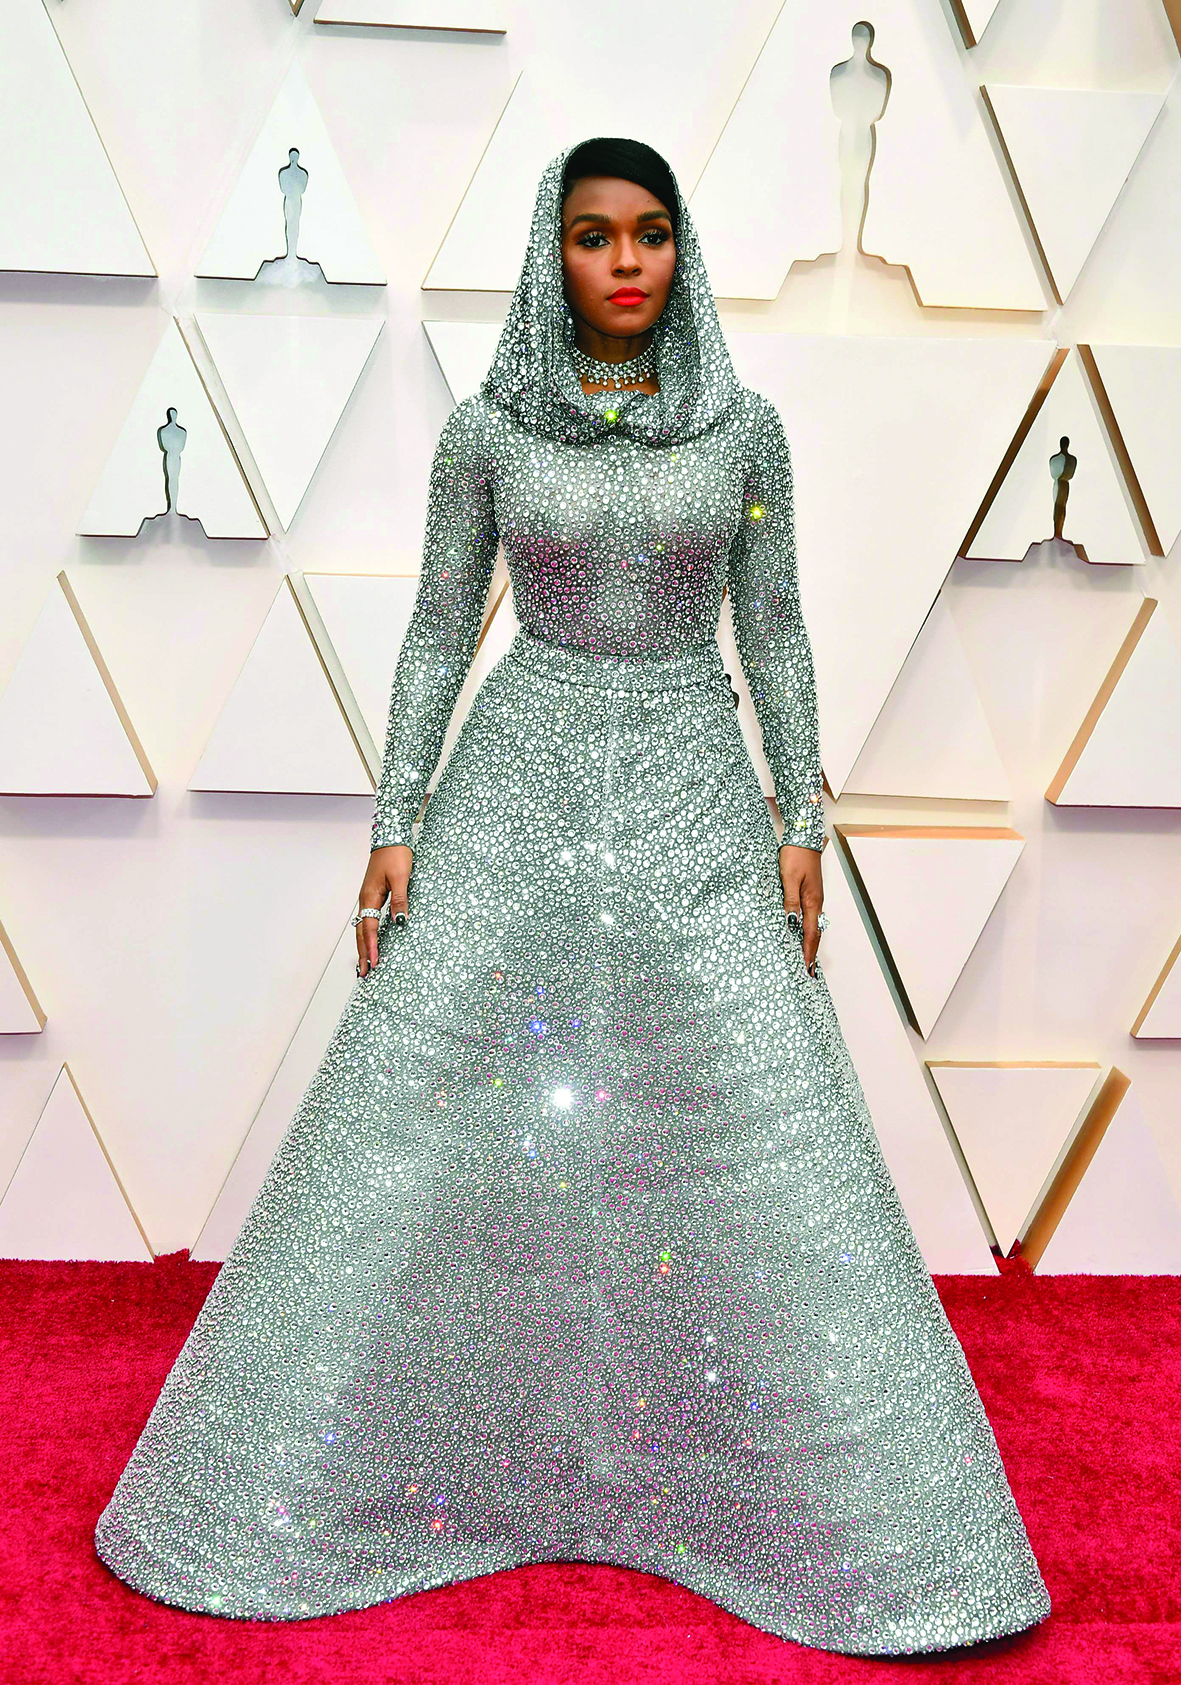 HOLLYWOOD, CALIFORNIA - FEBRUARY 09: Janelle Mon·e attends the 92nd Annual Academy Awards at Hollywood and Highland on February 09, 2020 in Hollywood, California.   Amy Sussman/Getty Images/AFPn== FOR NEWSPAPERS, INTERNET, TELCOS &amp; TELEVISION USE ONLY ==